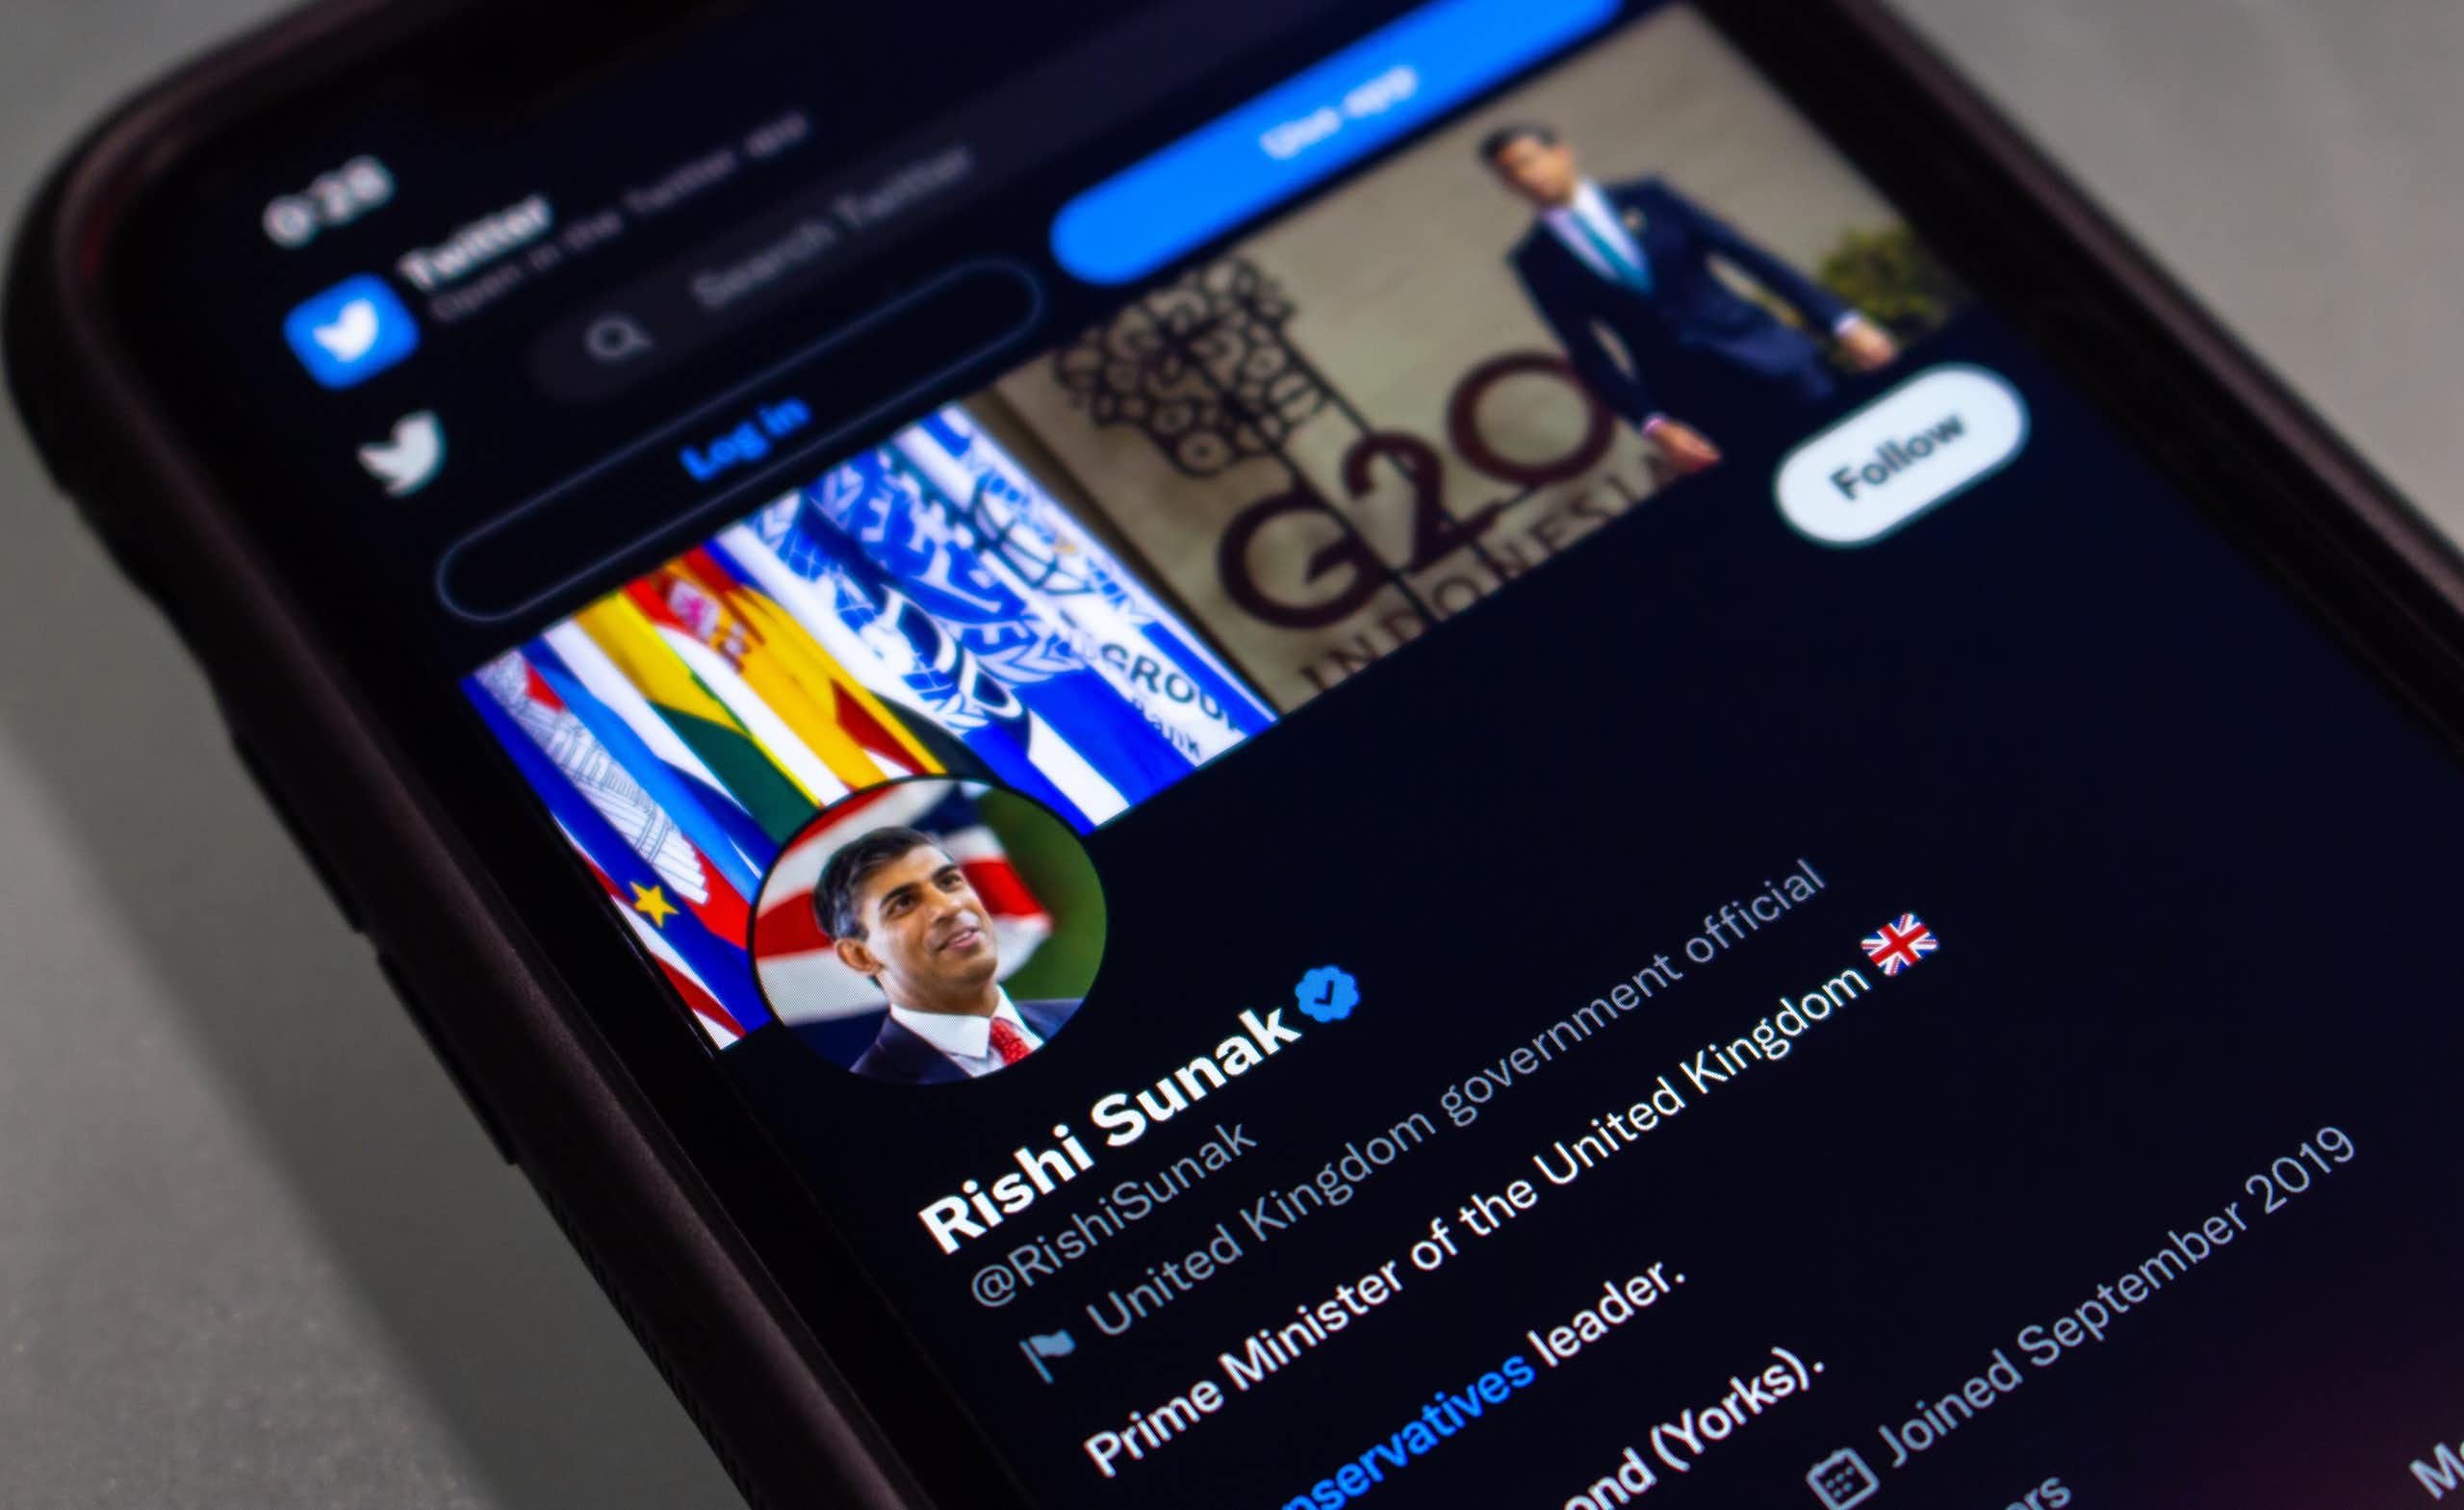 Photo of a mobile phone with Rishi Sunak's Twitter profile pulled up